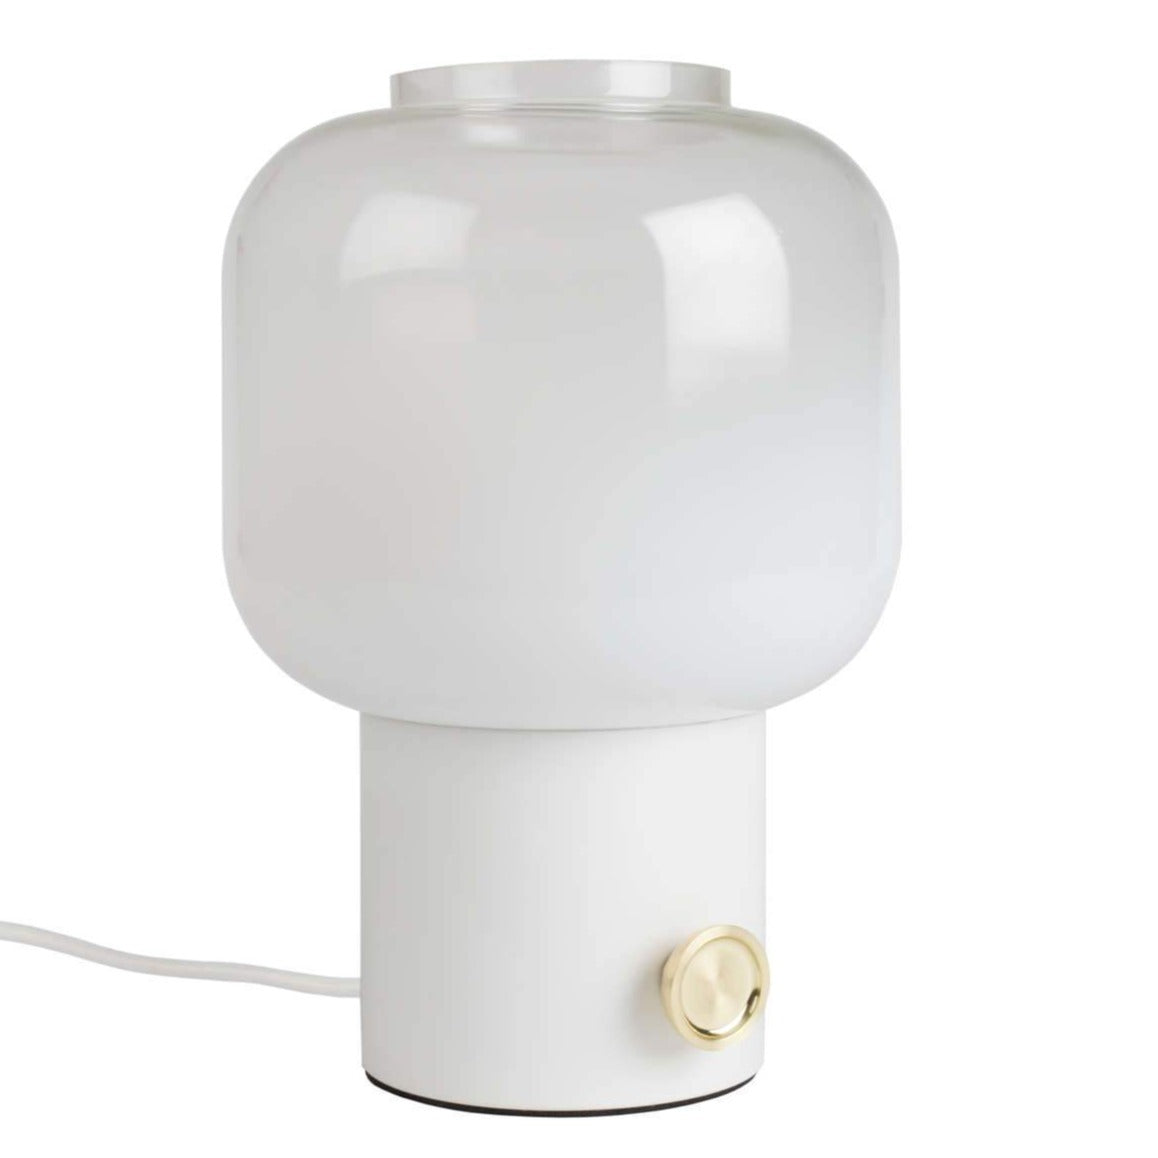 Table lamp MOODY white, Zuiver, Eye on Design